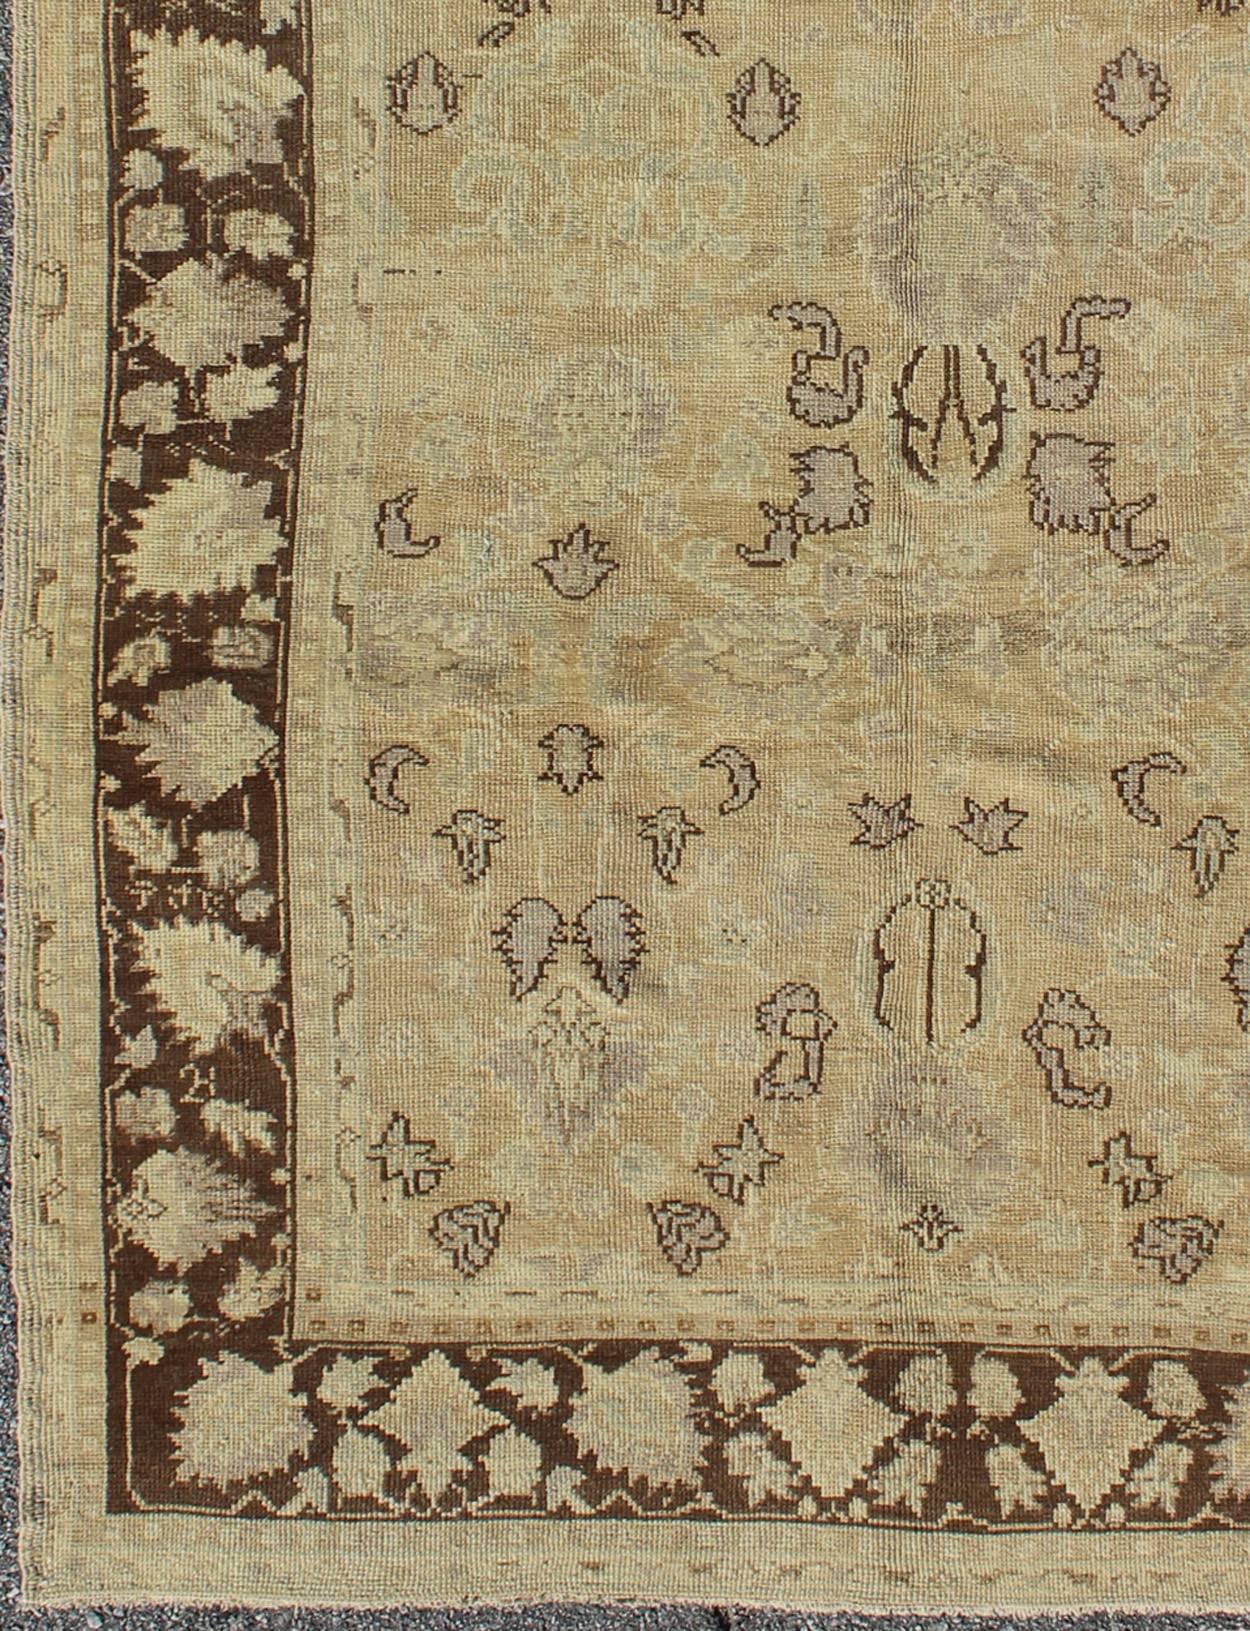 Vining Floral design all-over Turkish Oushak vintage rug in tan, cream, brown, rug en-115064, country of origin / type: Turkey / Oushak, circa 1930.

The all over design of this beautiful vintage Oushak rug from mid-20th century Turkey is enhanced